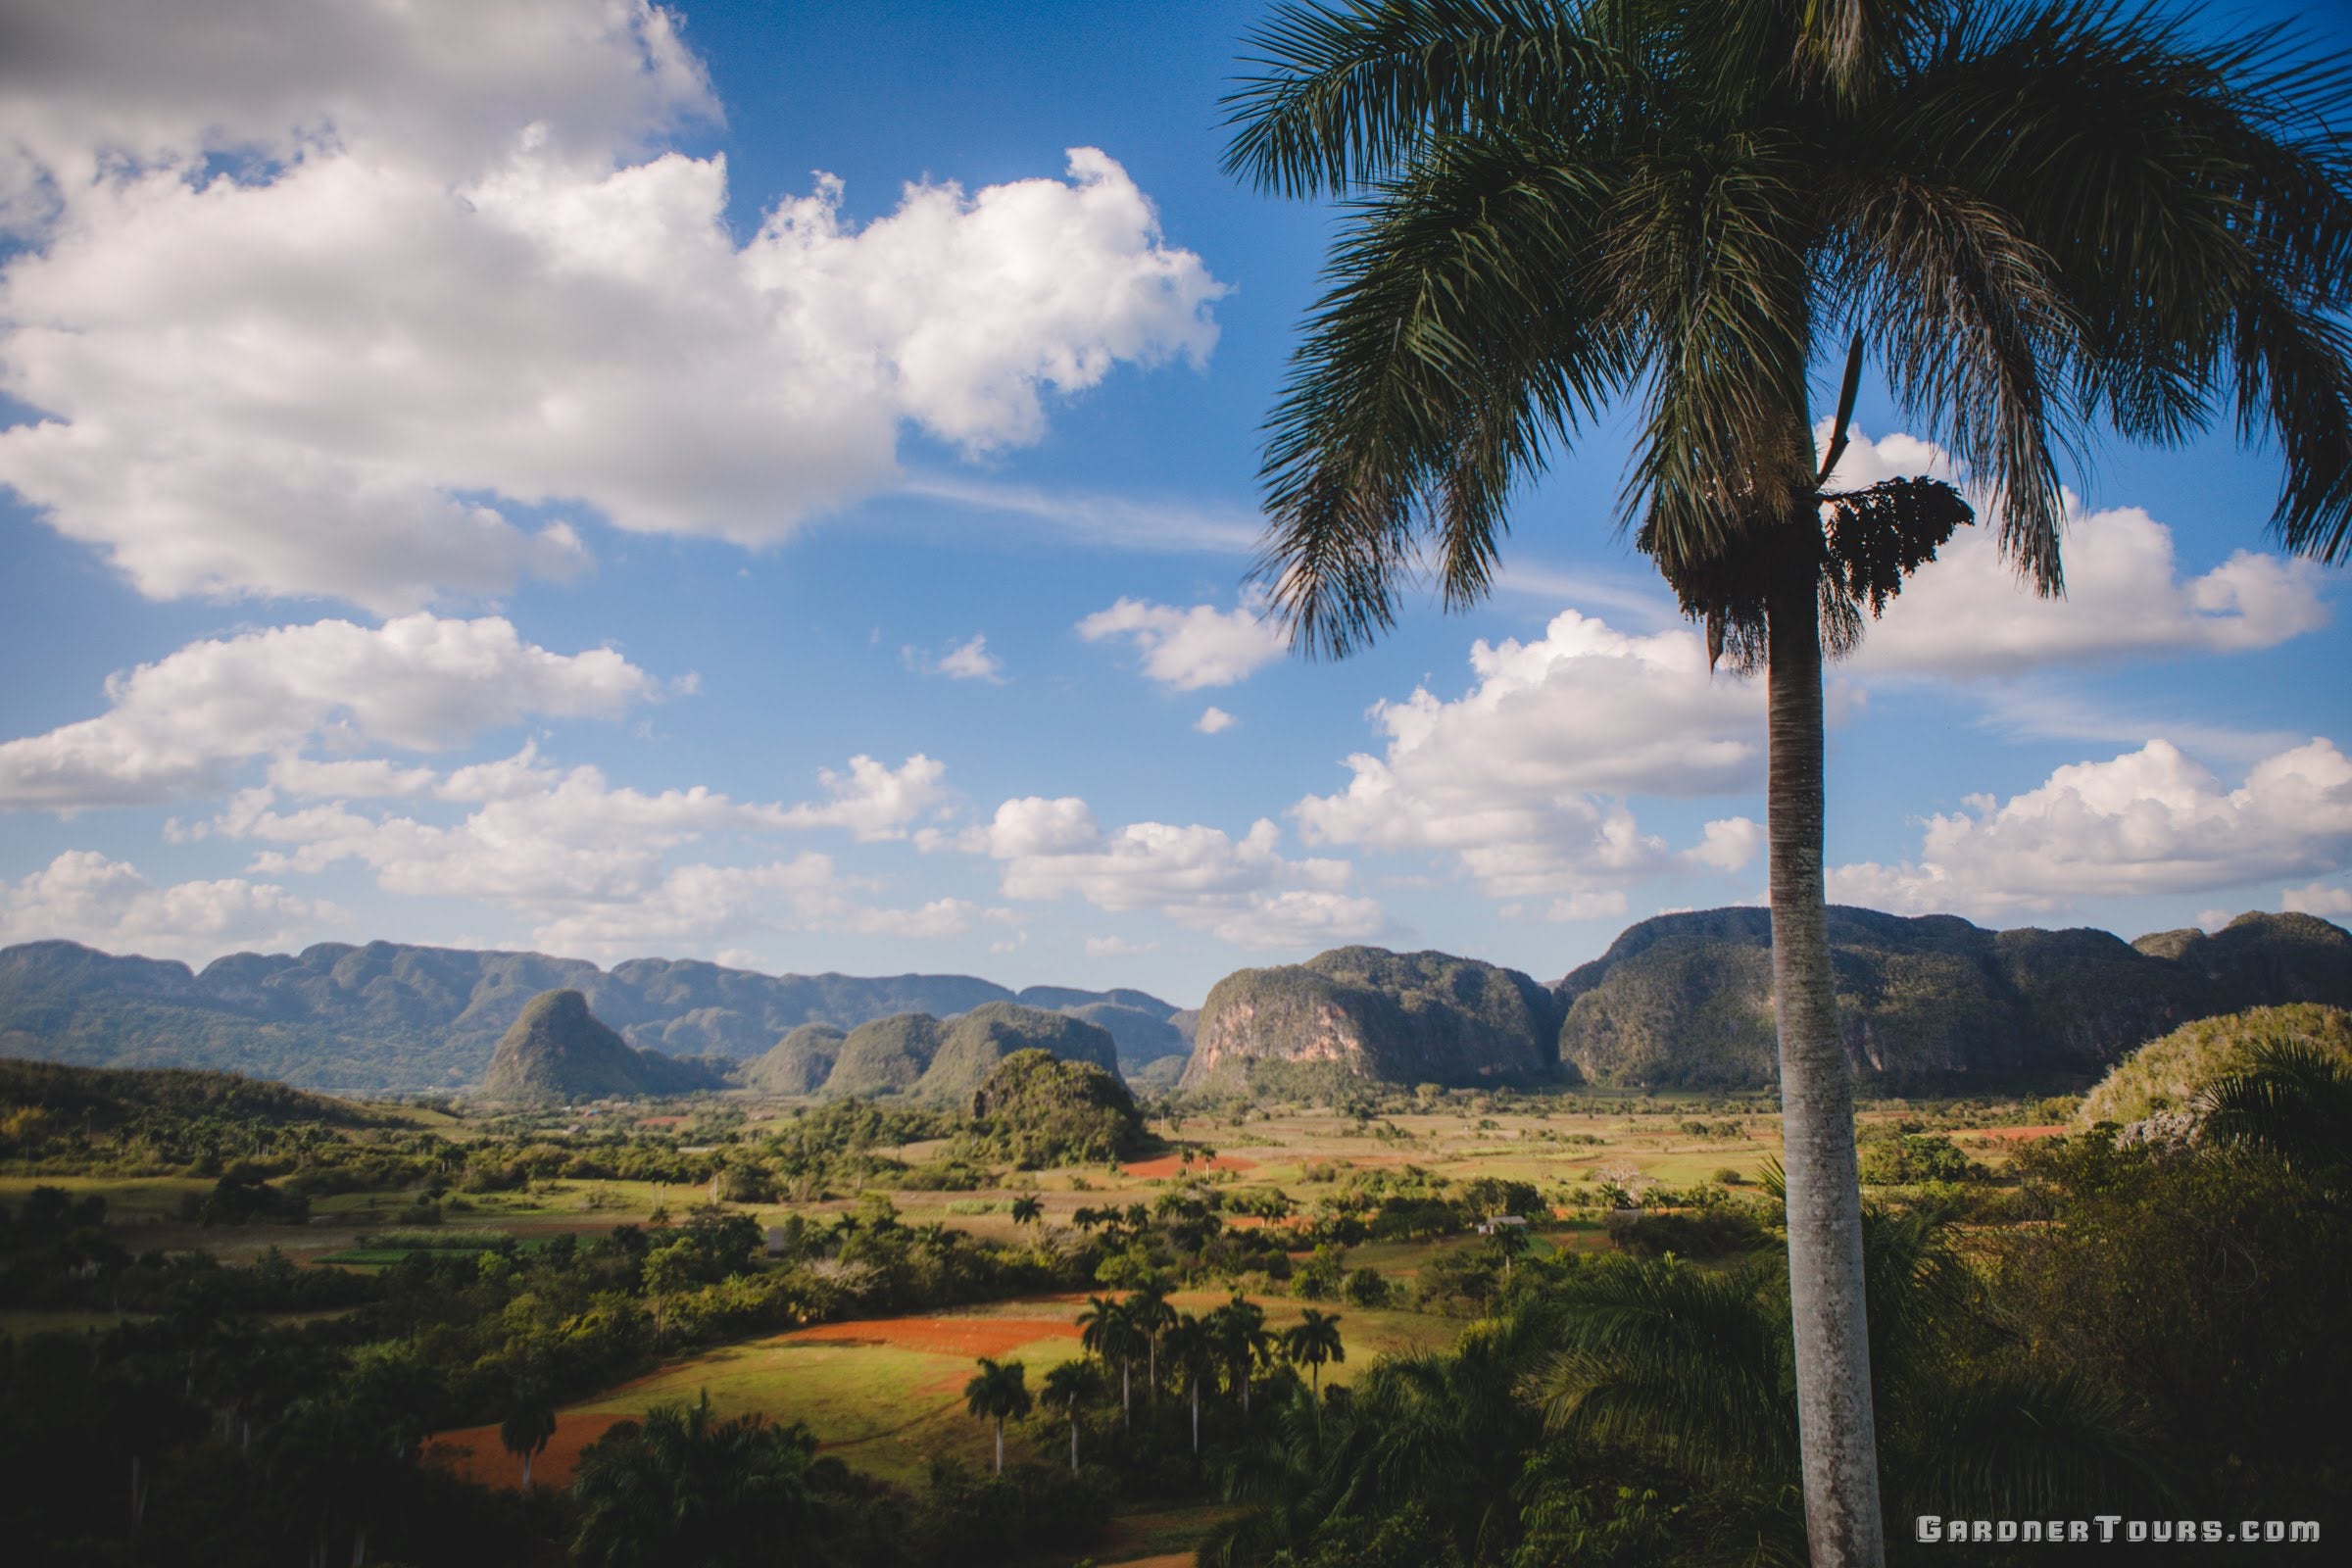 The Viewpoint of the Viñales Valley from Hotel Los Jazmines with the Palm Tree in View in Viñales, Cuba